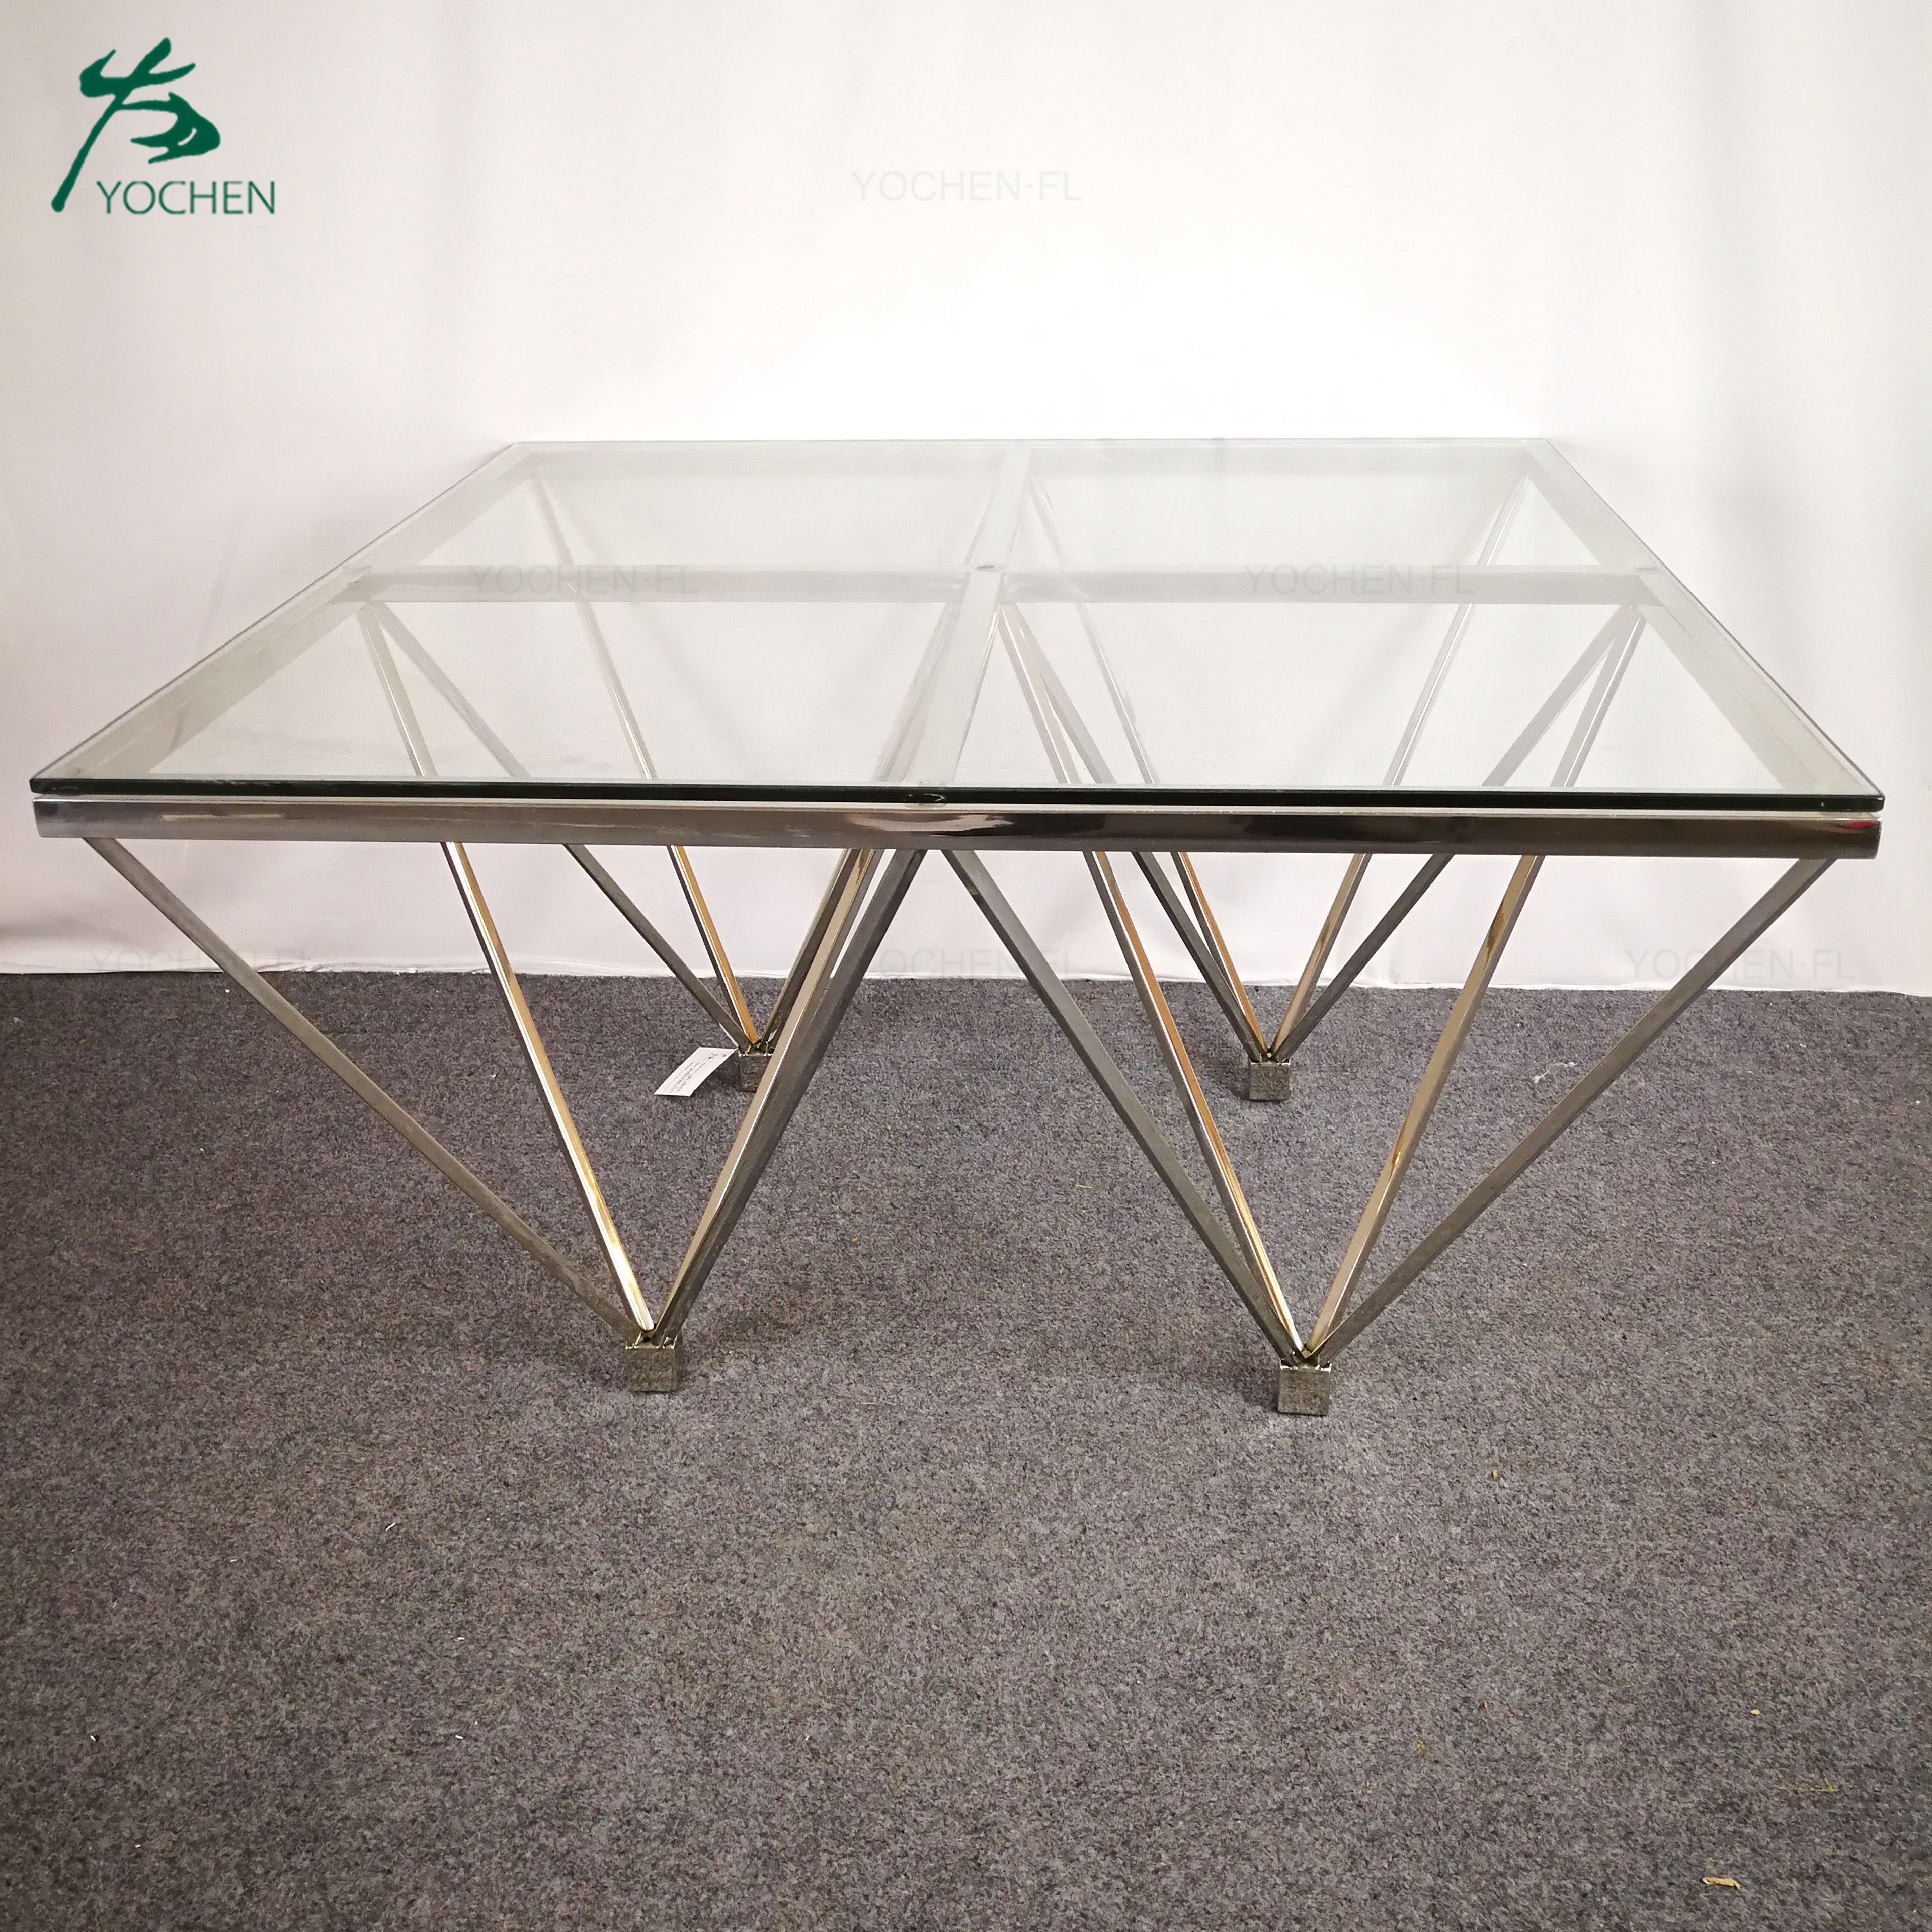 Living room shining silver stainless steel antique furniture corner table